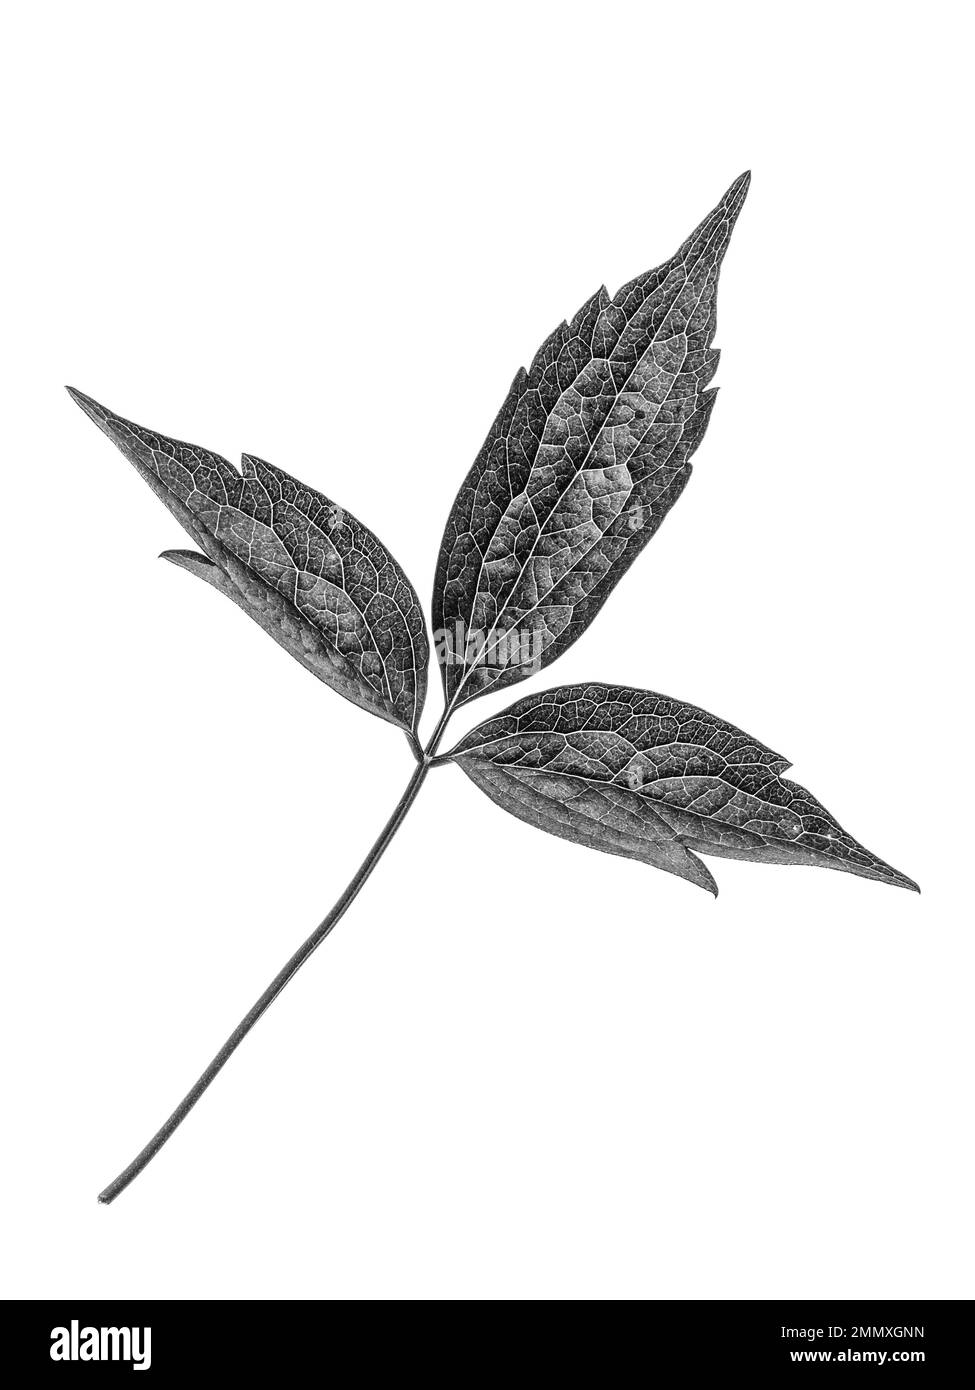 A black and white close up of a single Clematis montana leaf against a white background. Stock Photo